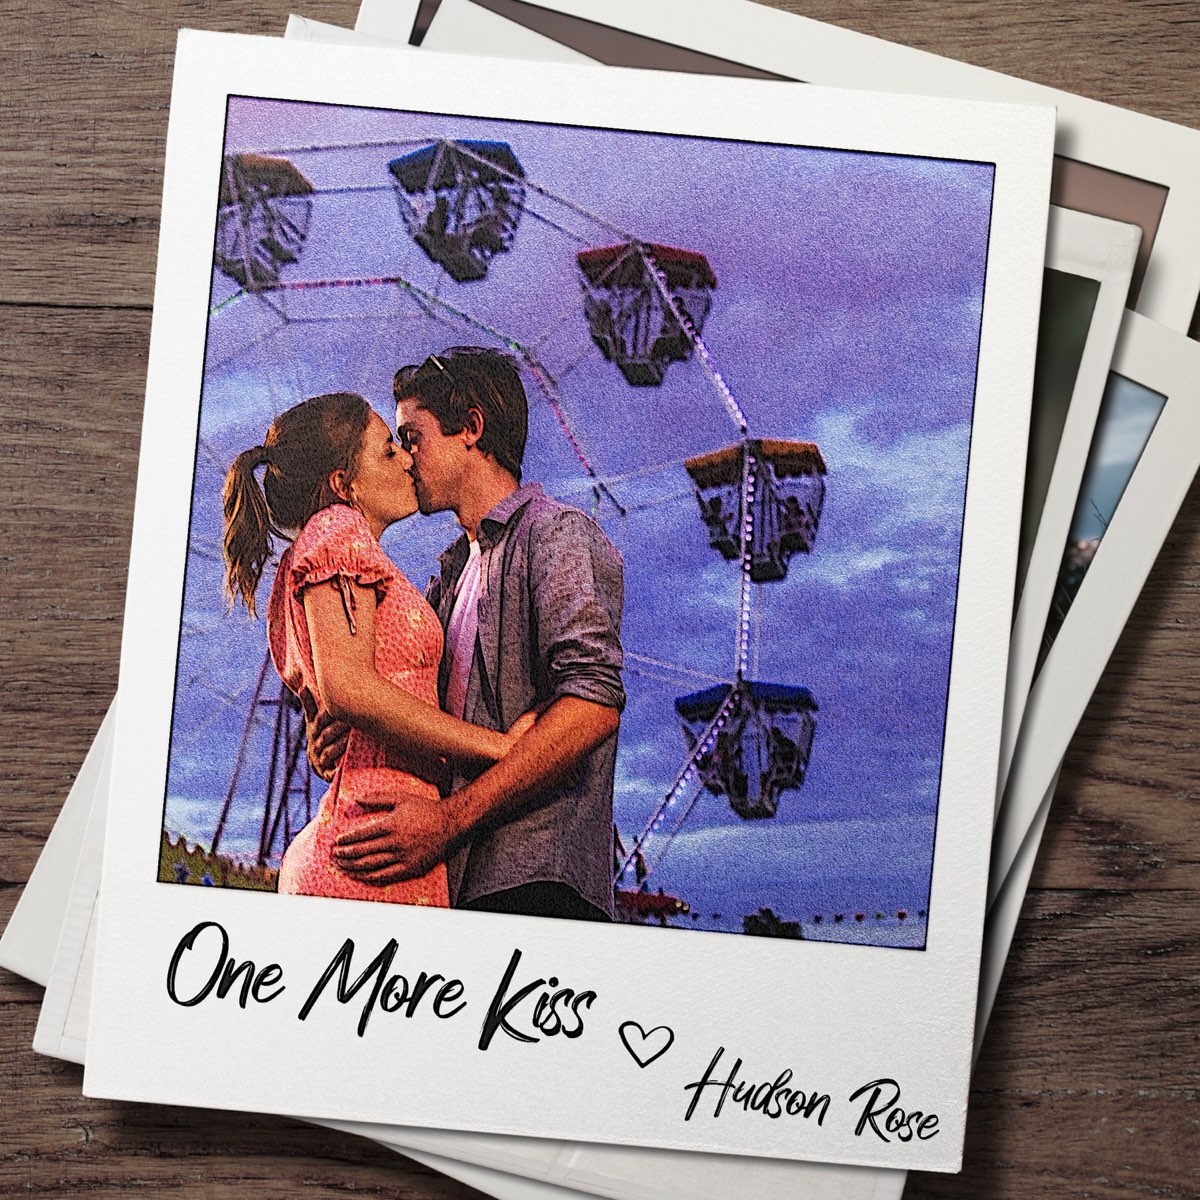 One More Kiss Single By Hudson Rose On Apple Music